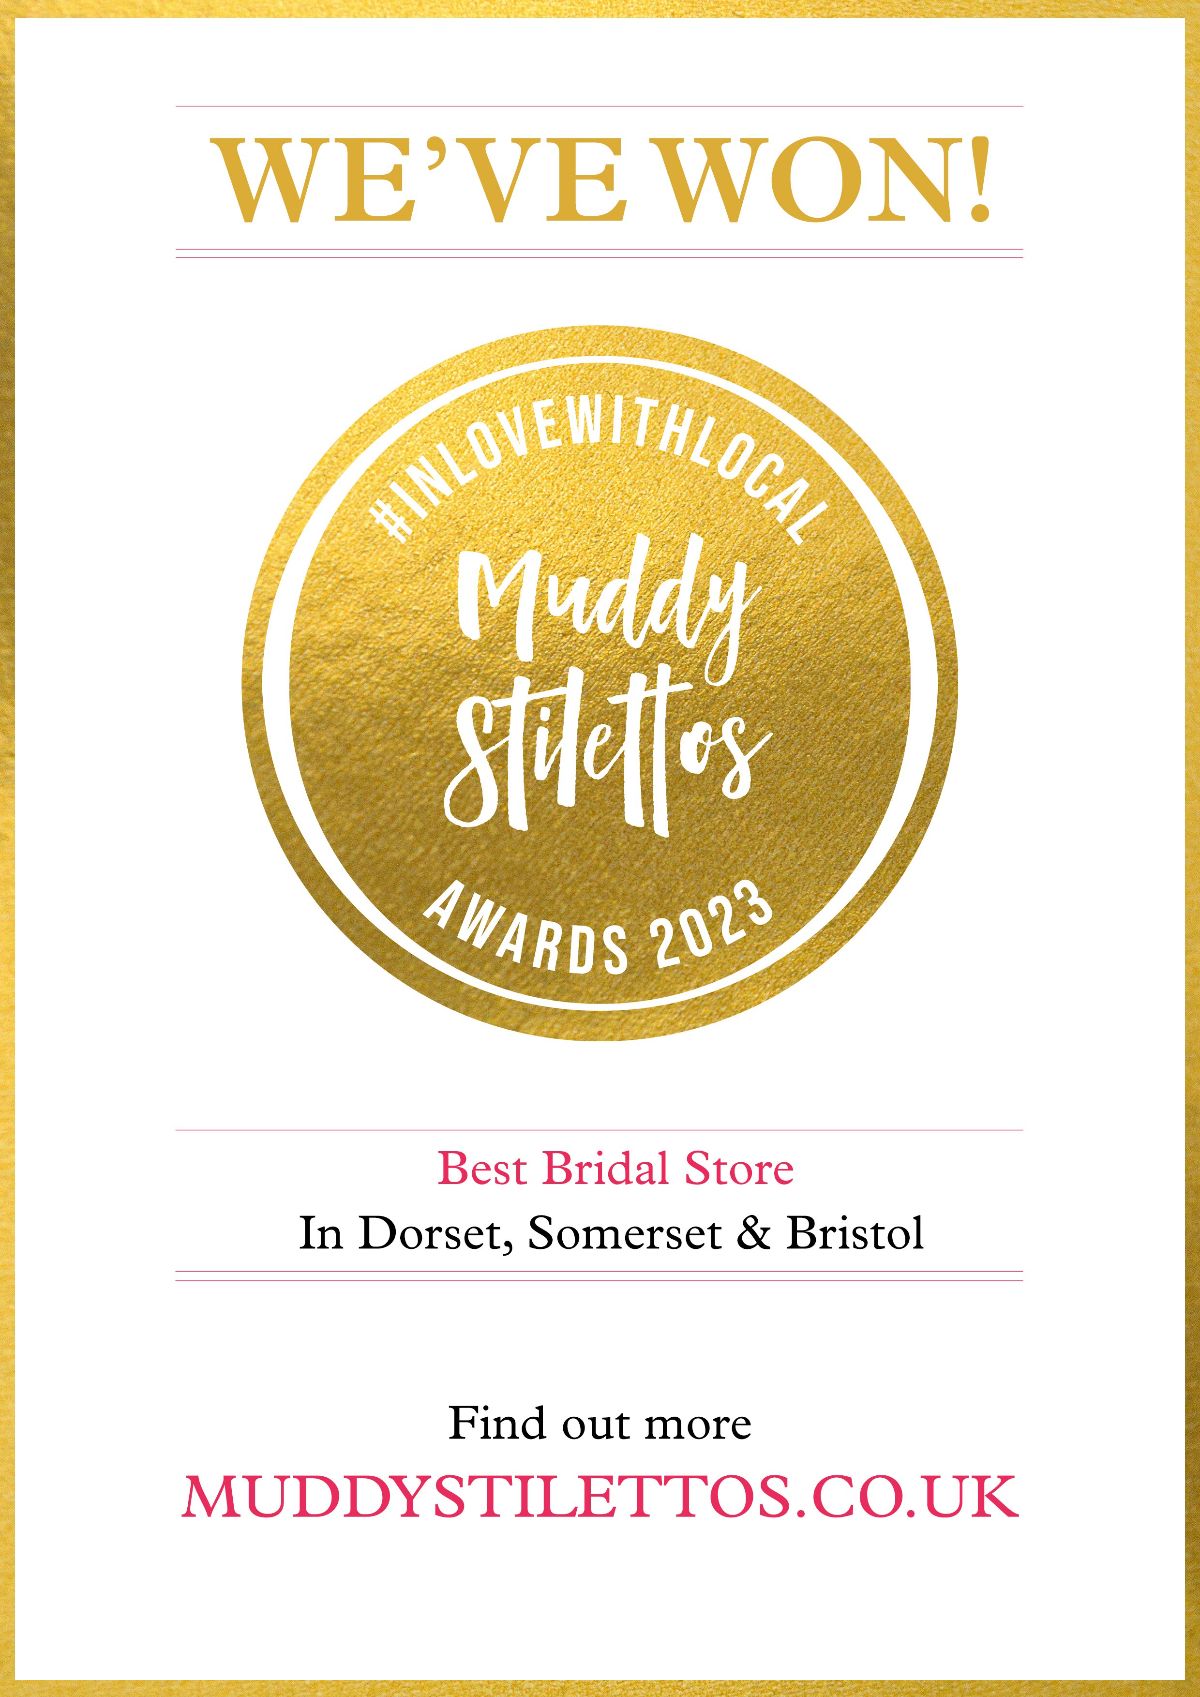 I was honoured to take home the award for "BEST BRIDAL STORE 2023" for Dorset Somerset & Bristol.